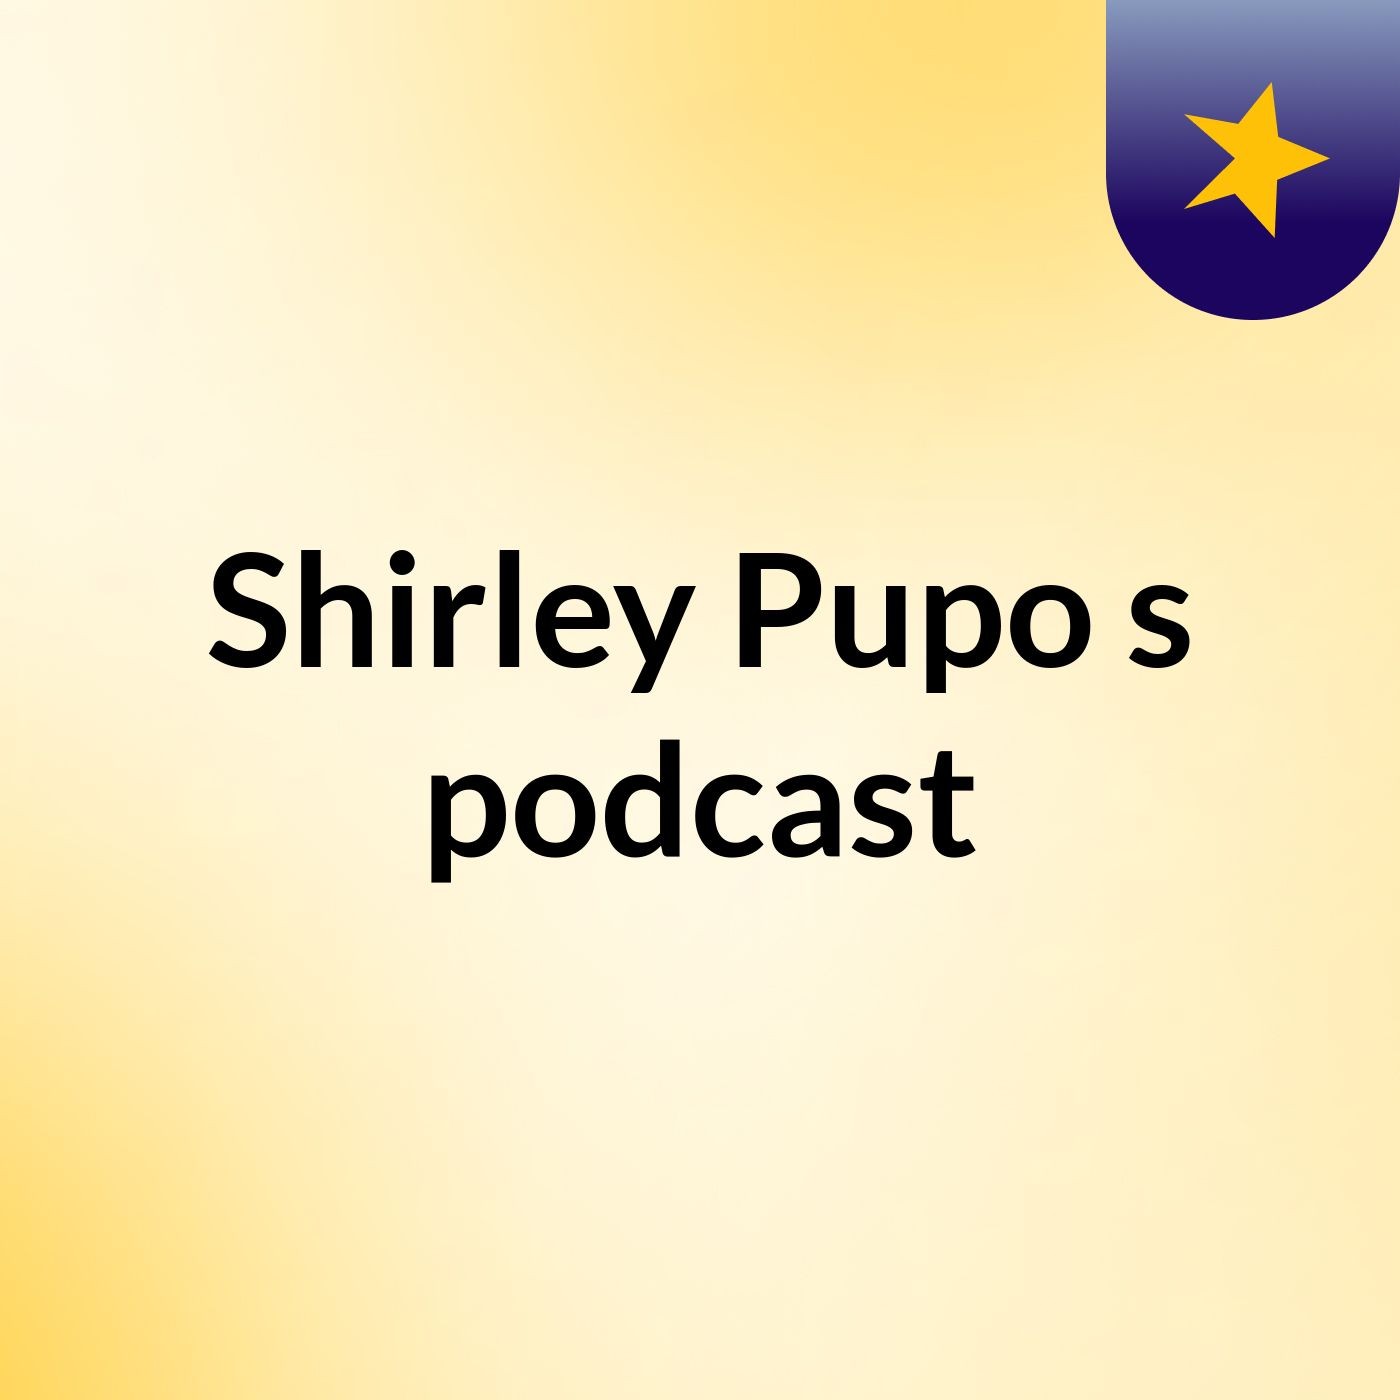 Episode 3 - Shirley Pupo's podcast